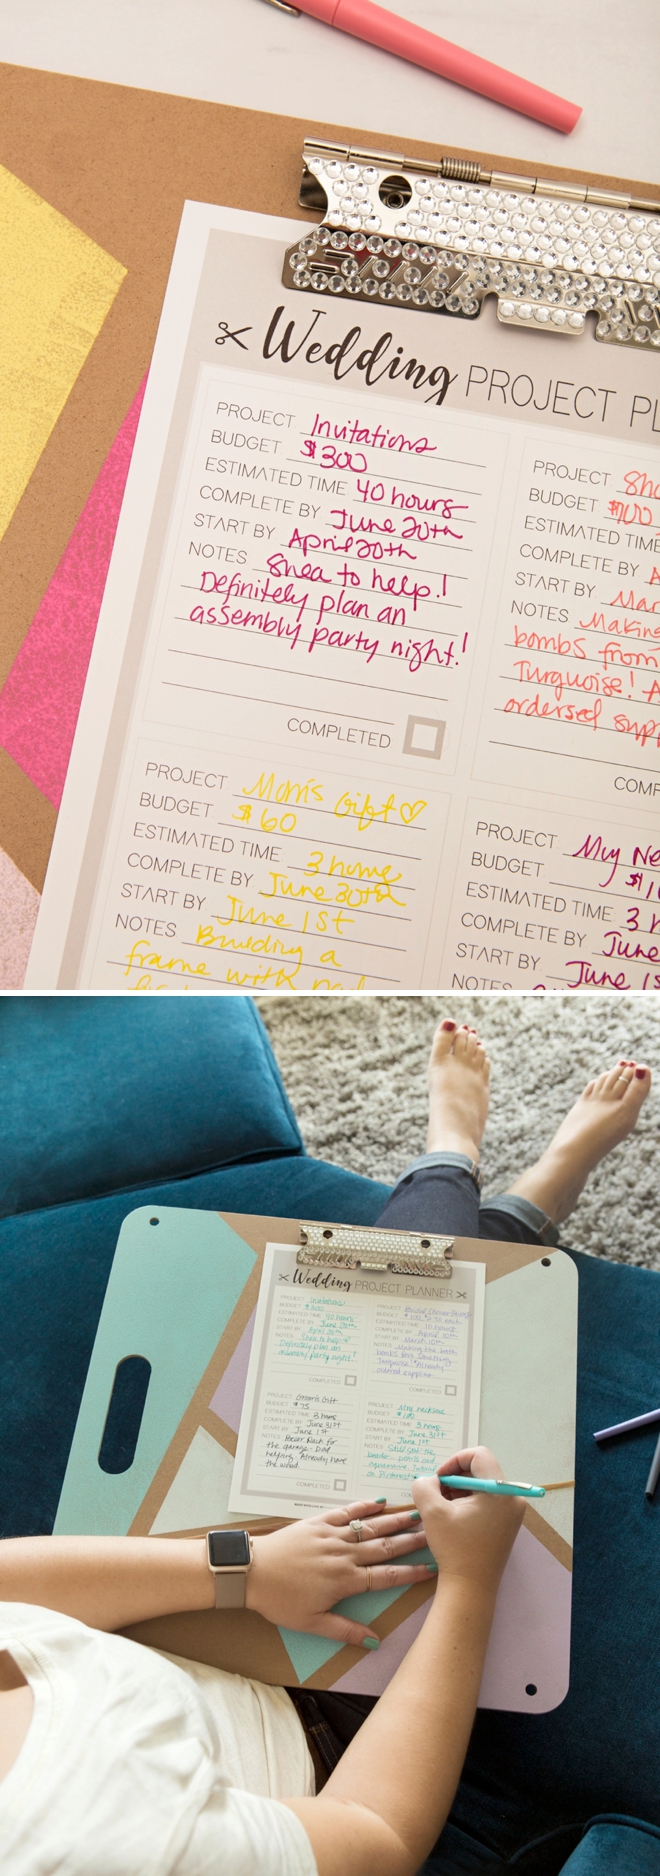 Adorable giant wedding planning clipboard